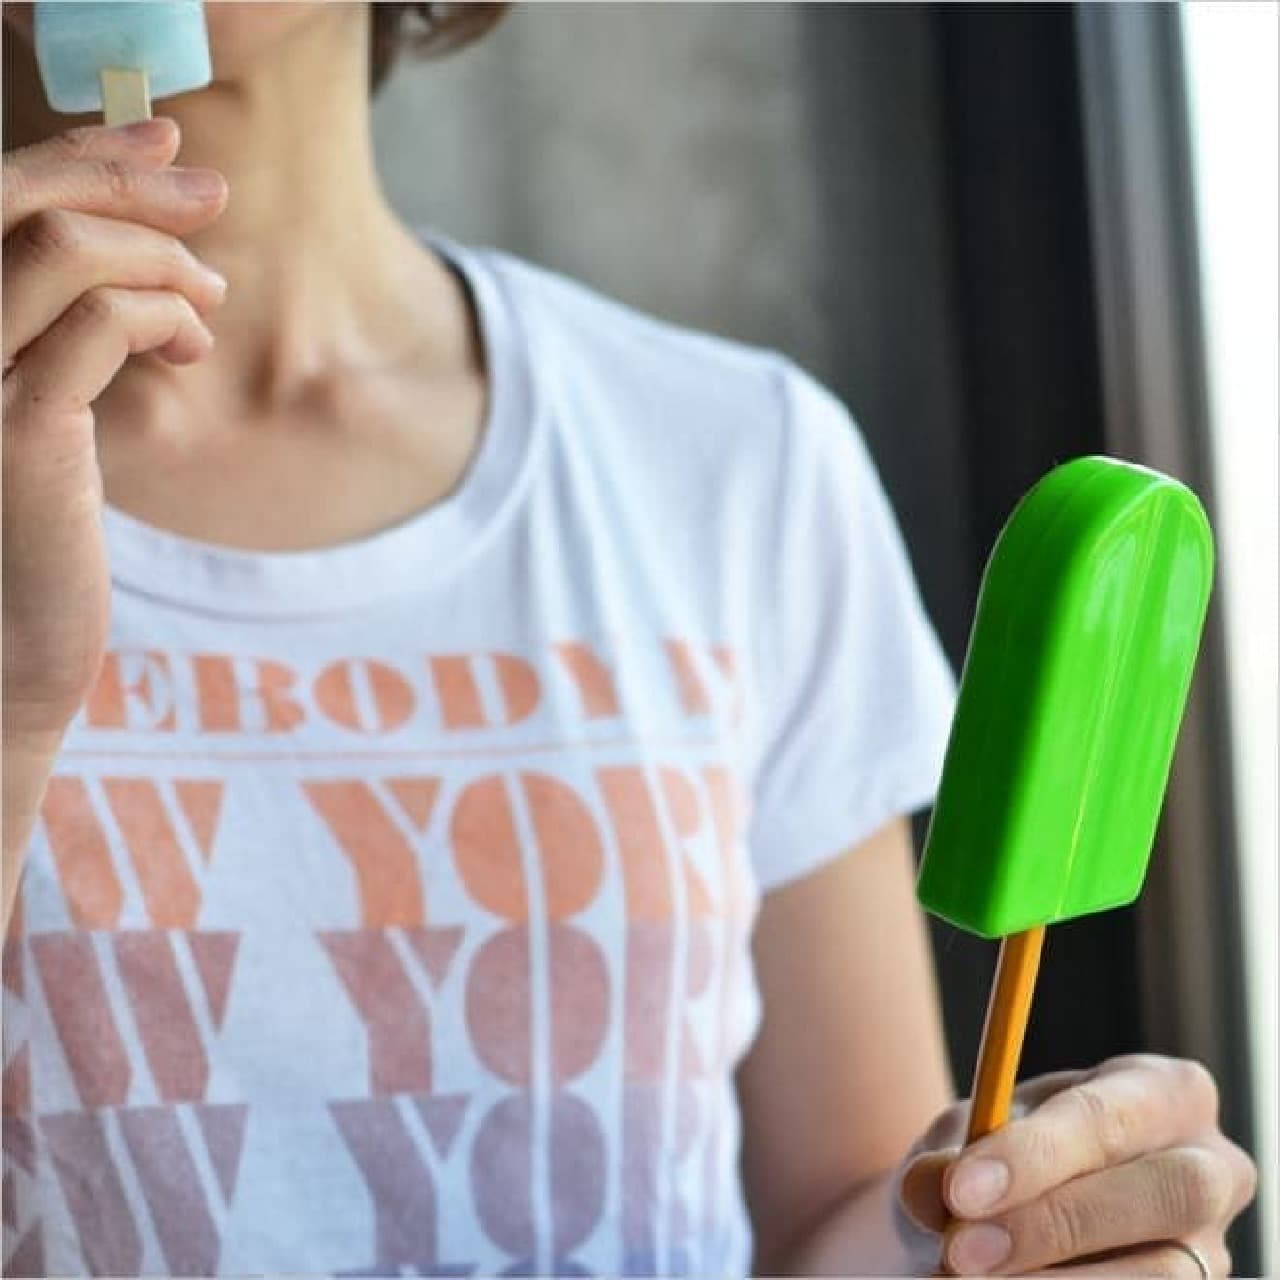 If you eat real popsicles, it will be really cool.